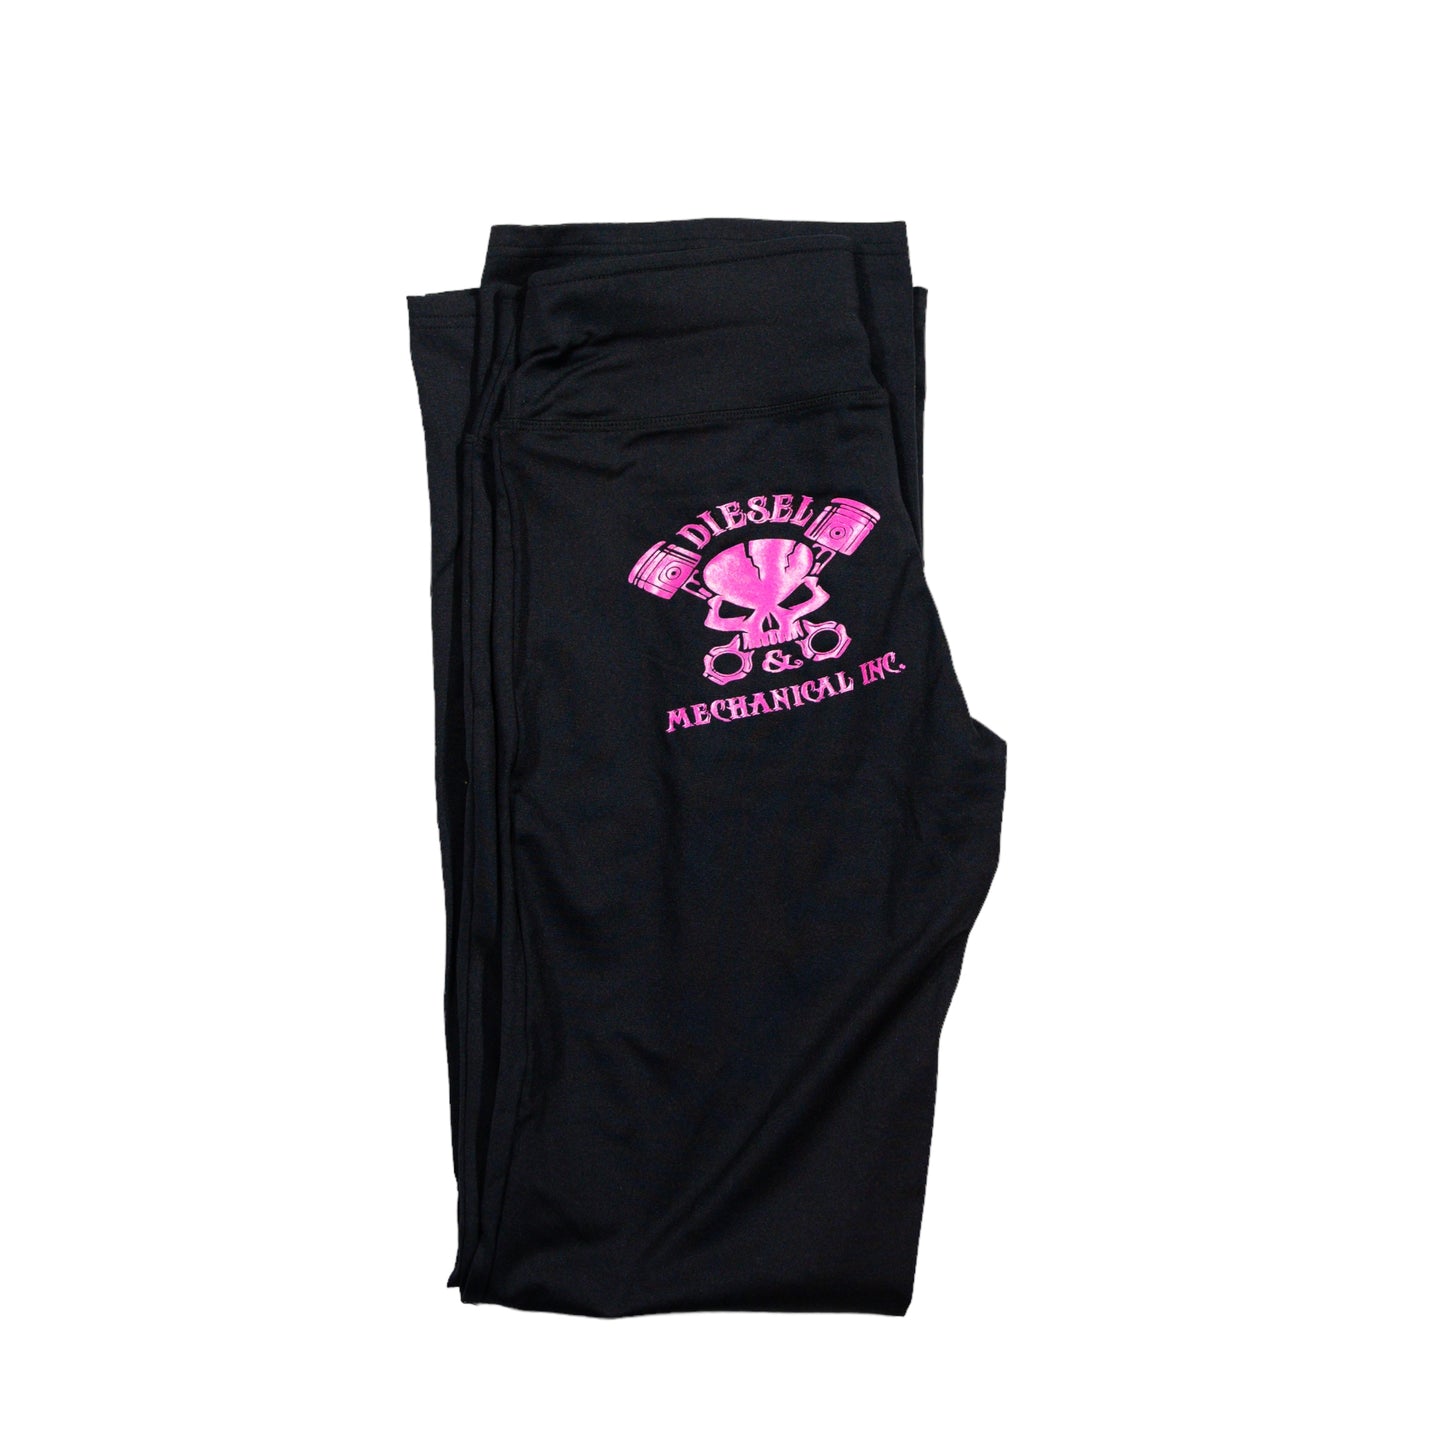 S&M Diesel Black Yoga Pant with logo- 5 color options avail